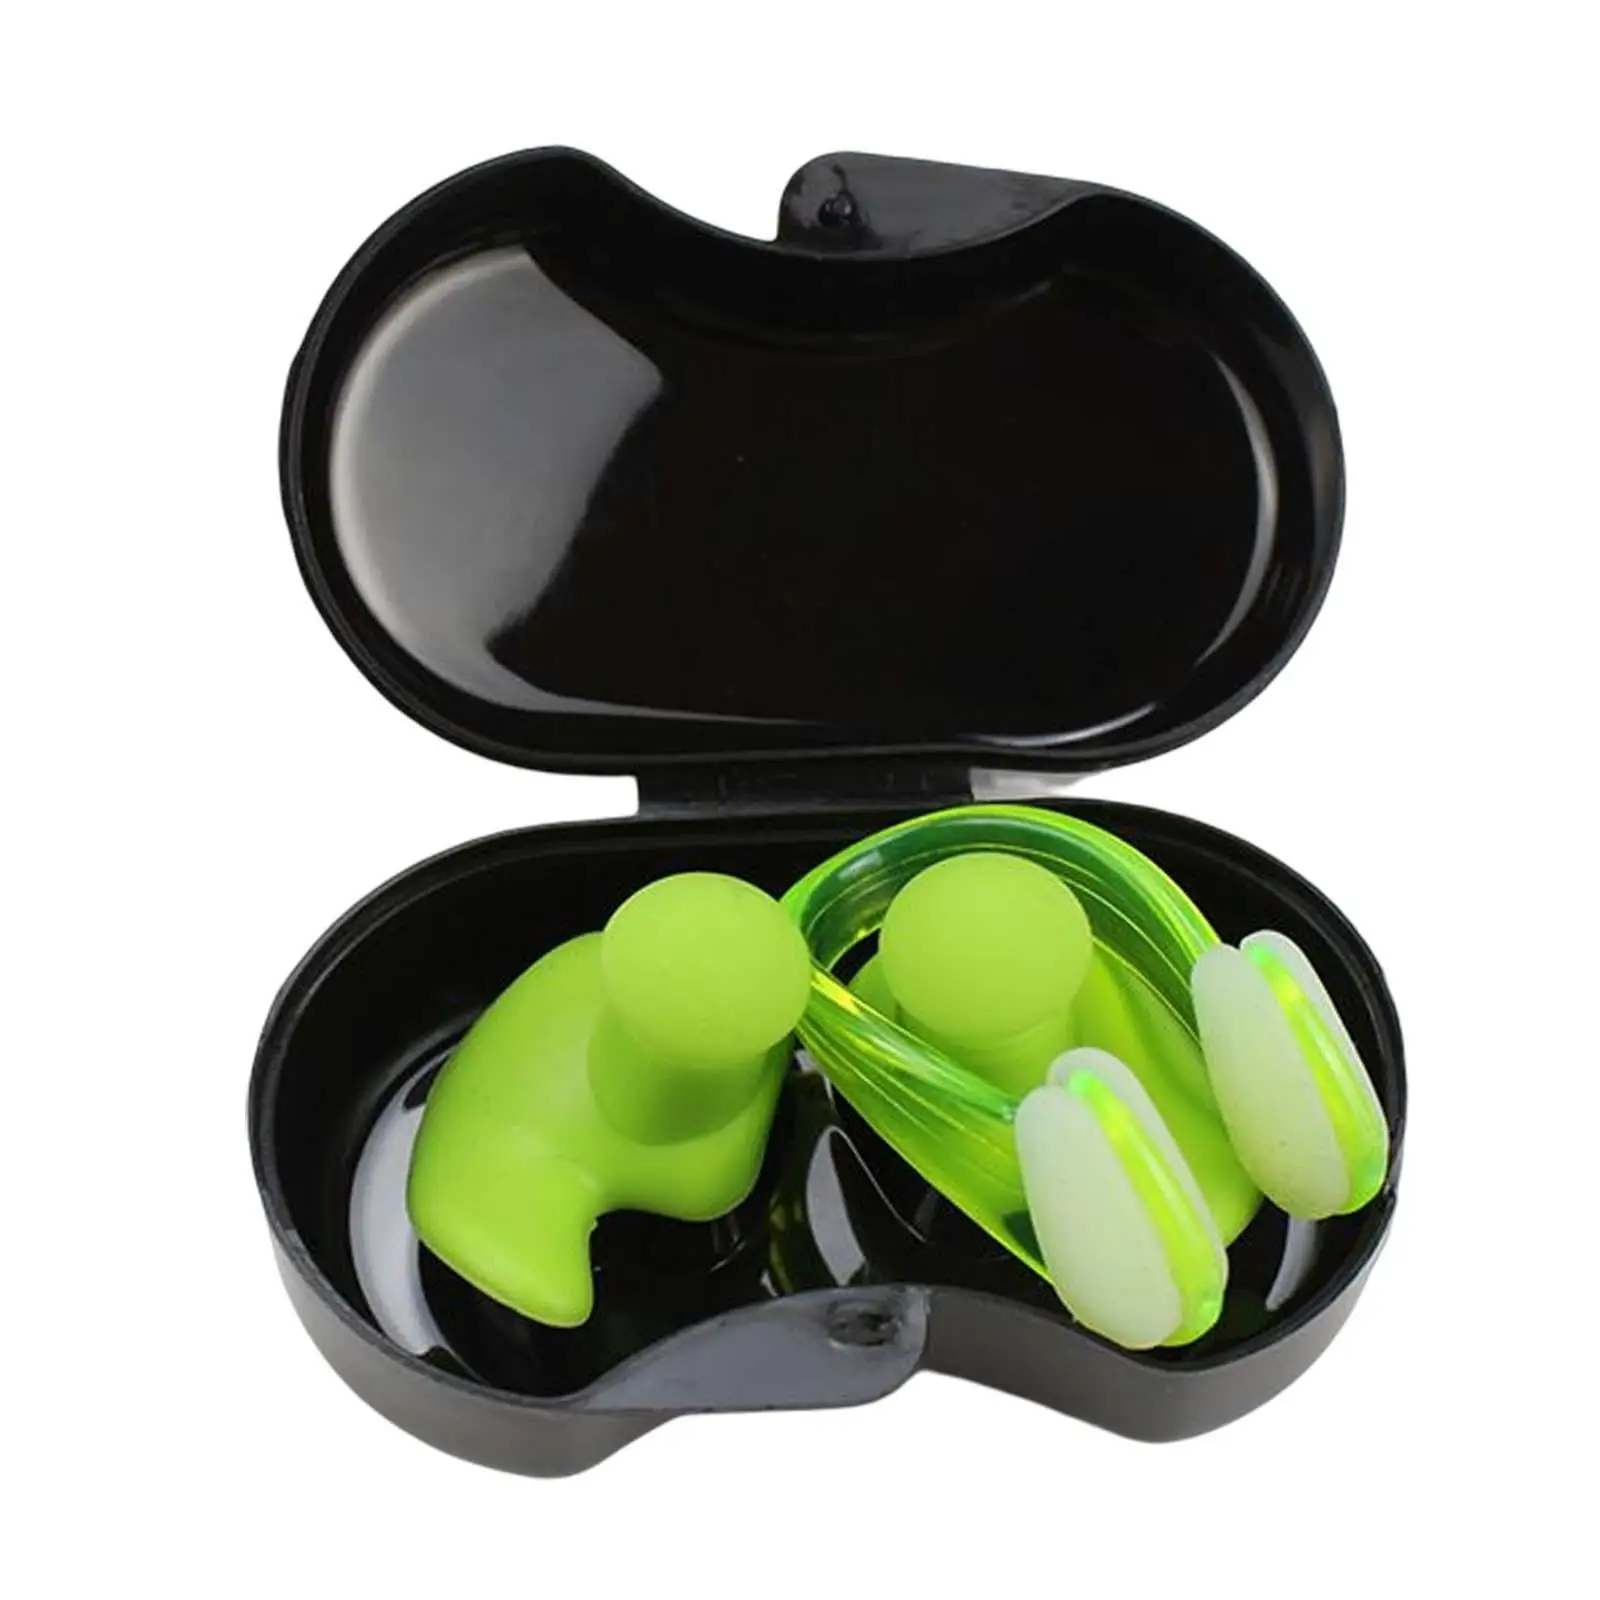 Swimming Ear Plug and Nose Clip Set Reusable Training with Storage Box Adult